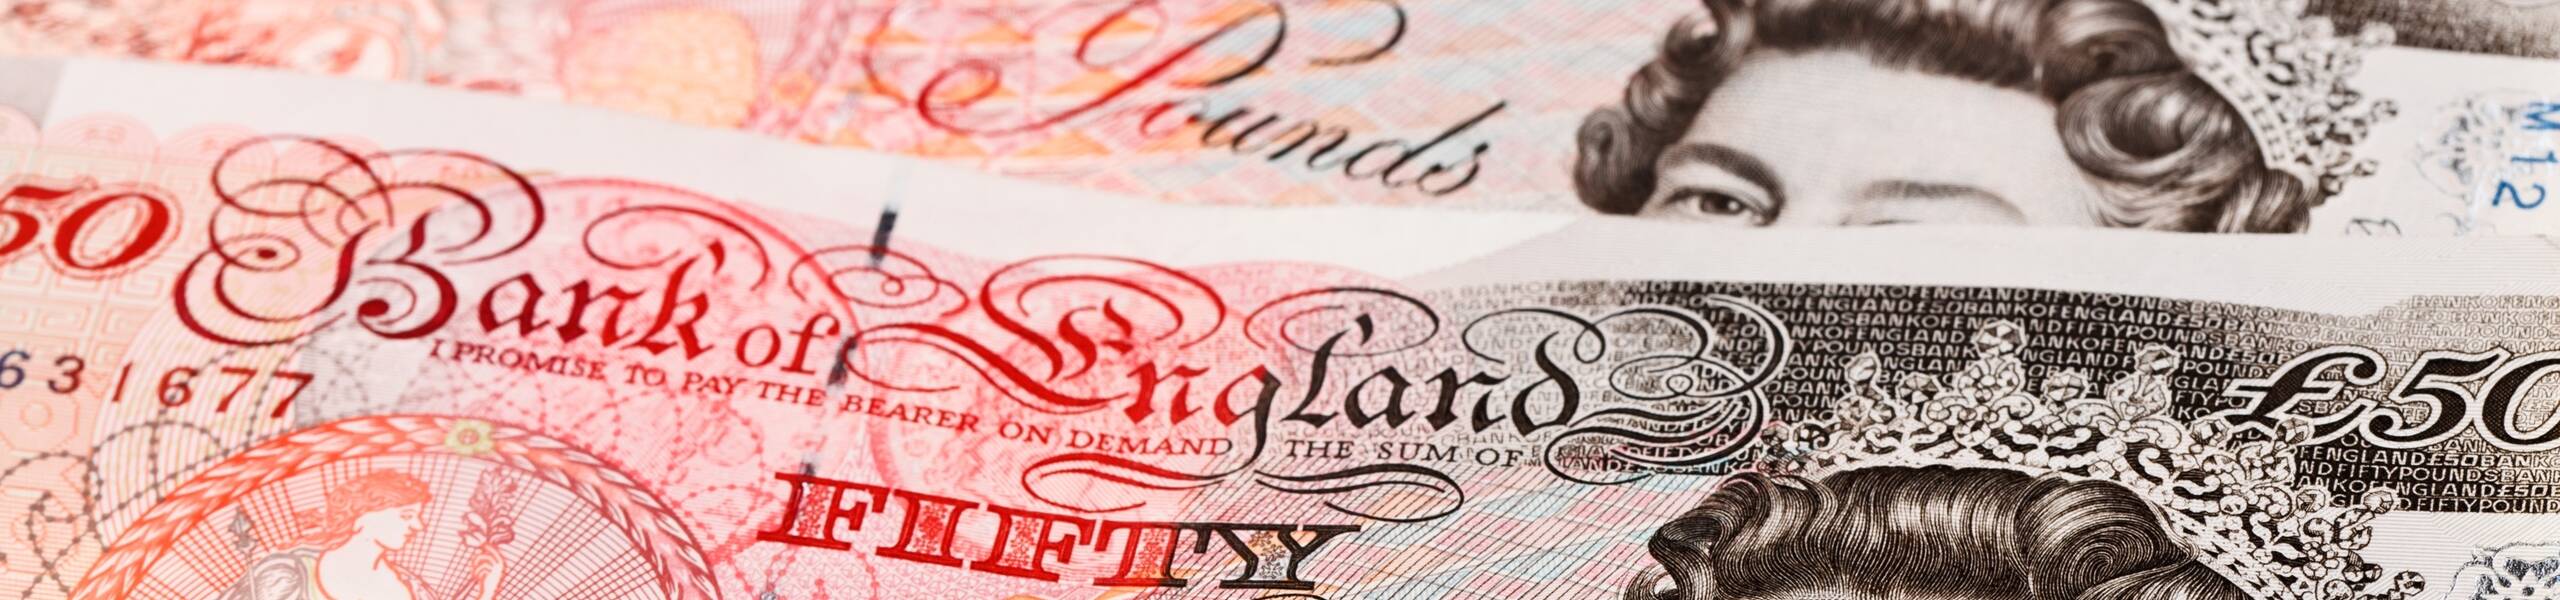 GBP/USD: price to test the nearest resistance